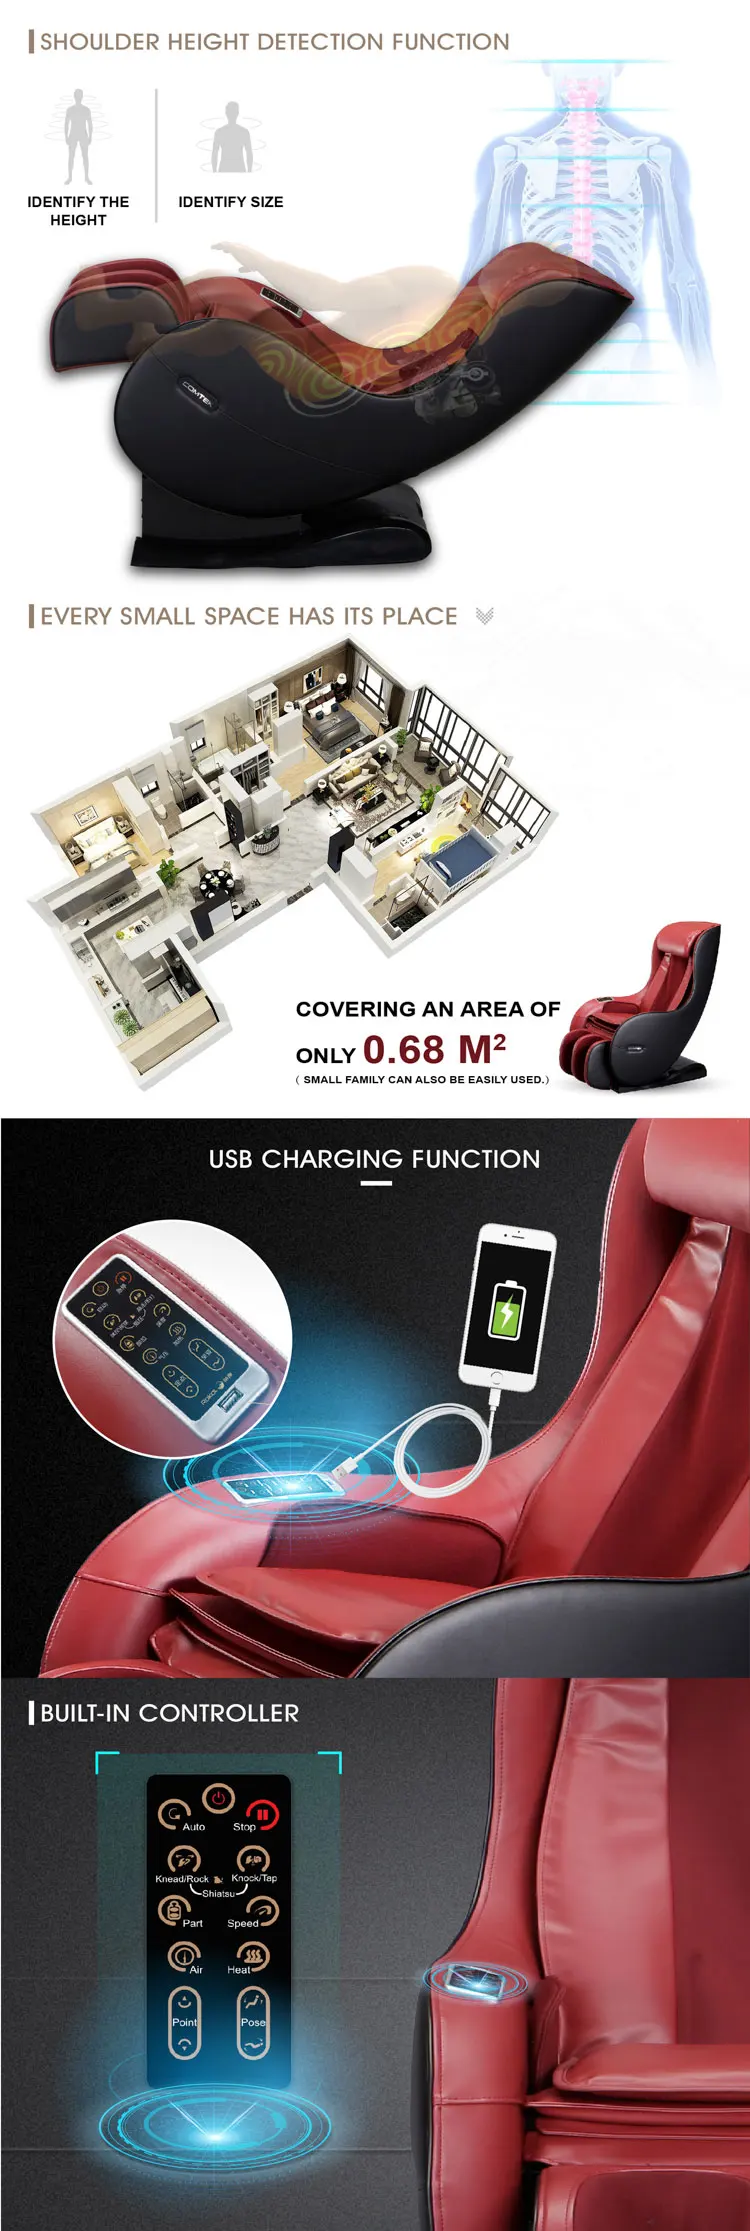 RK1900A new electronic massage sofa with zero gravity